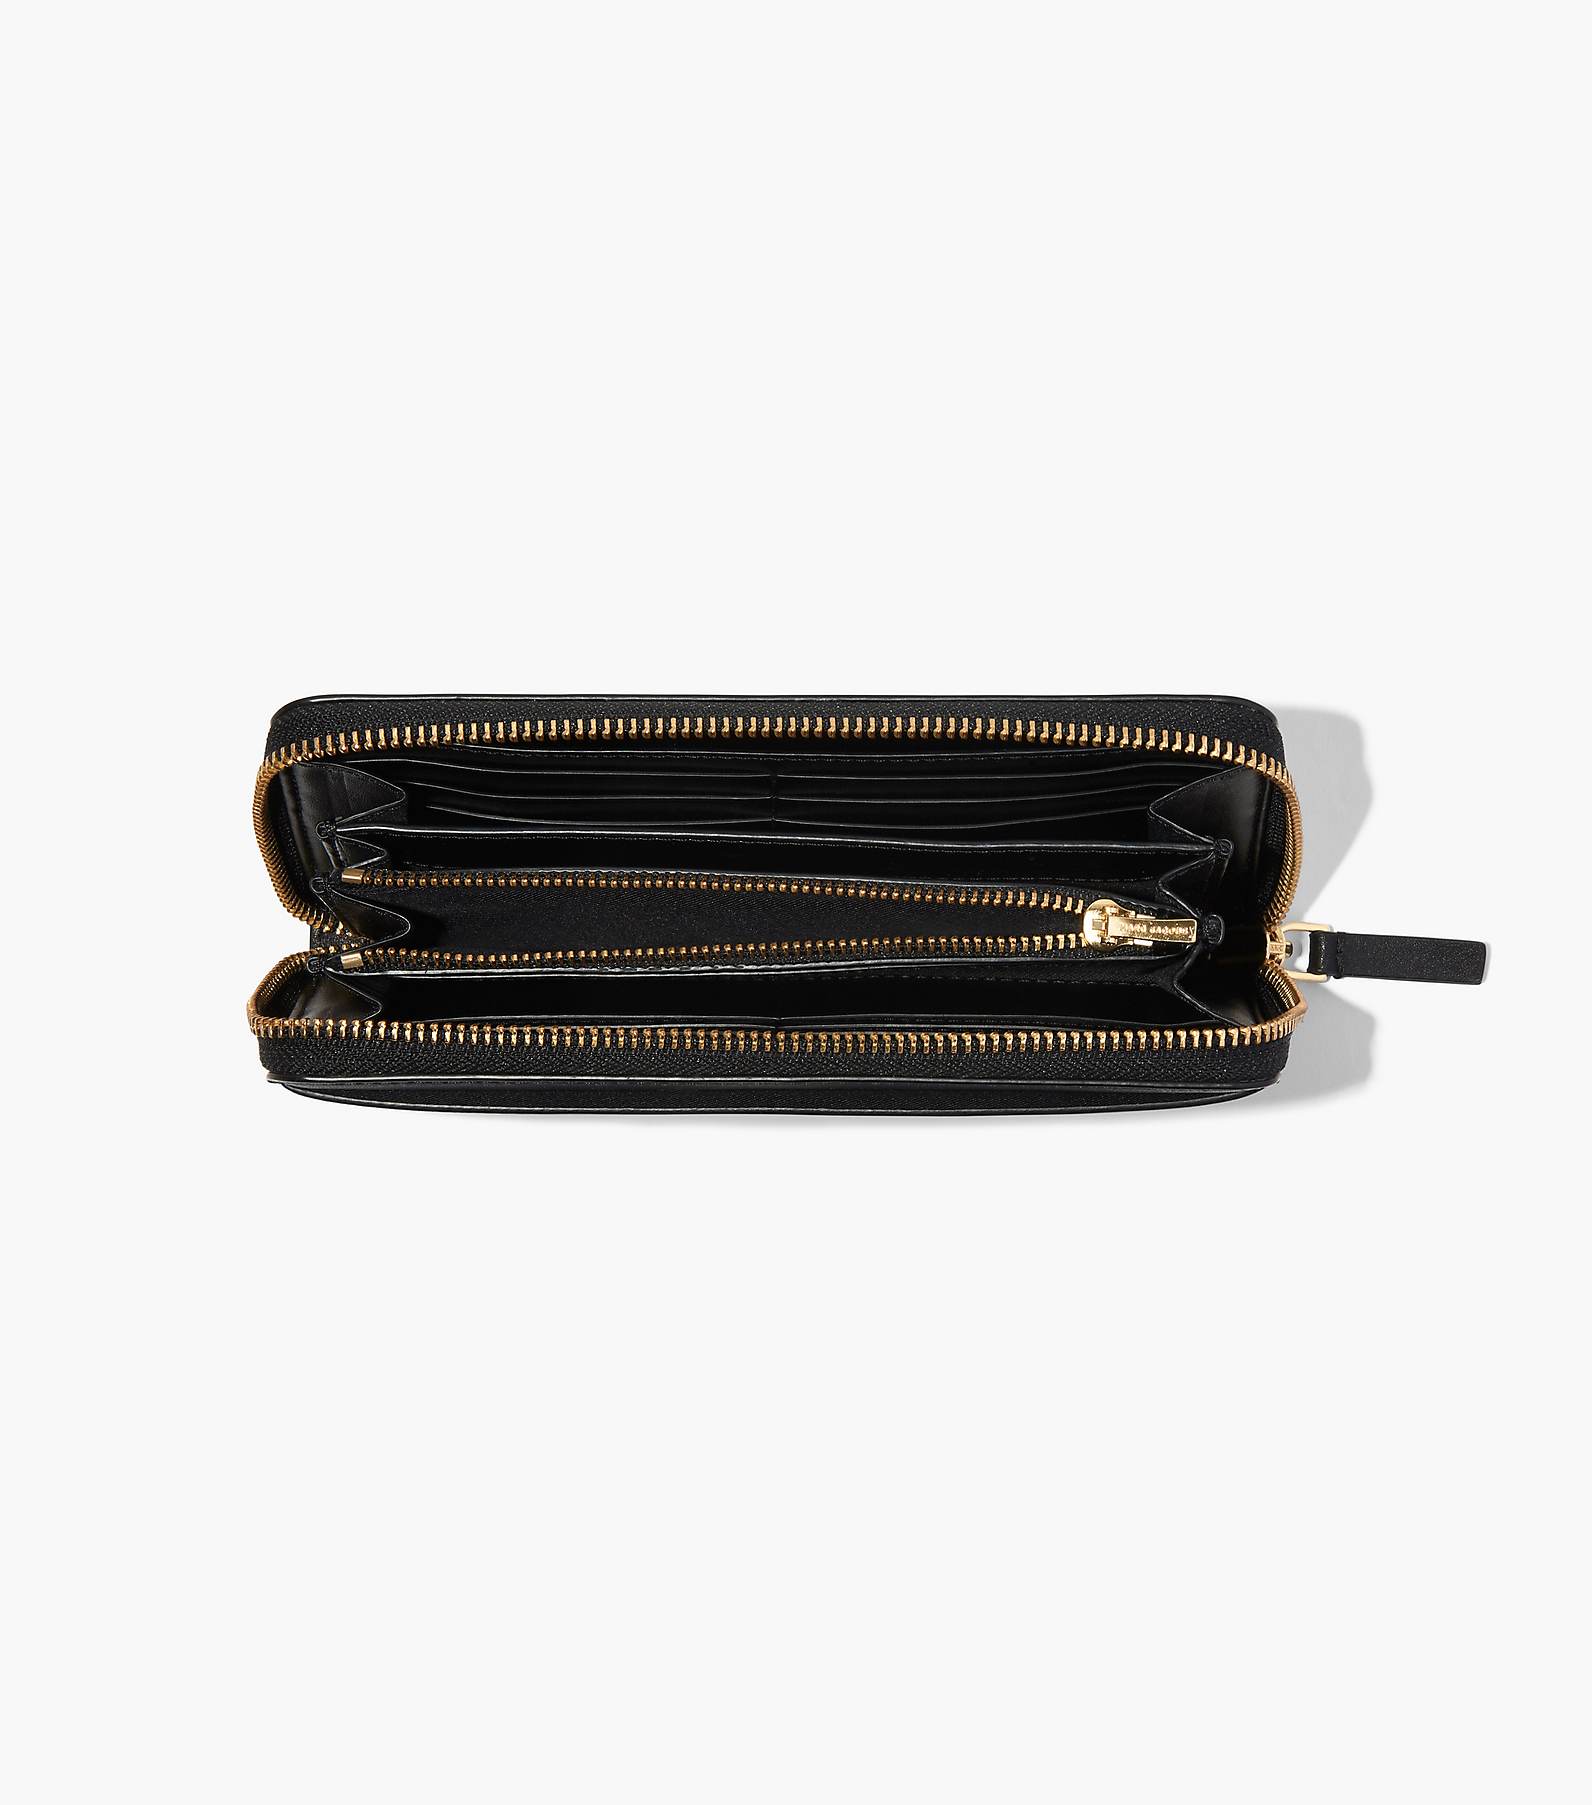 The J Marc Continental Wallet